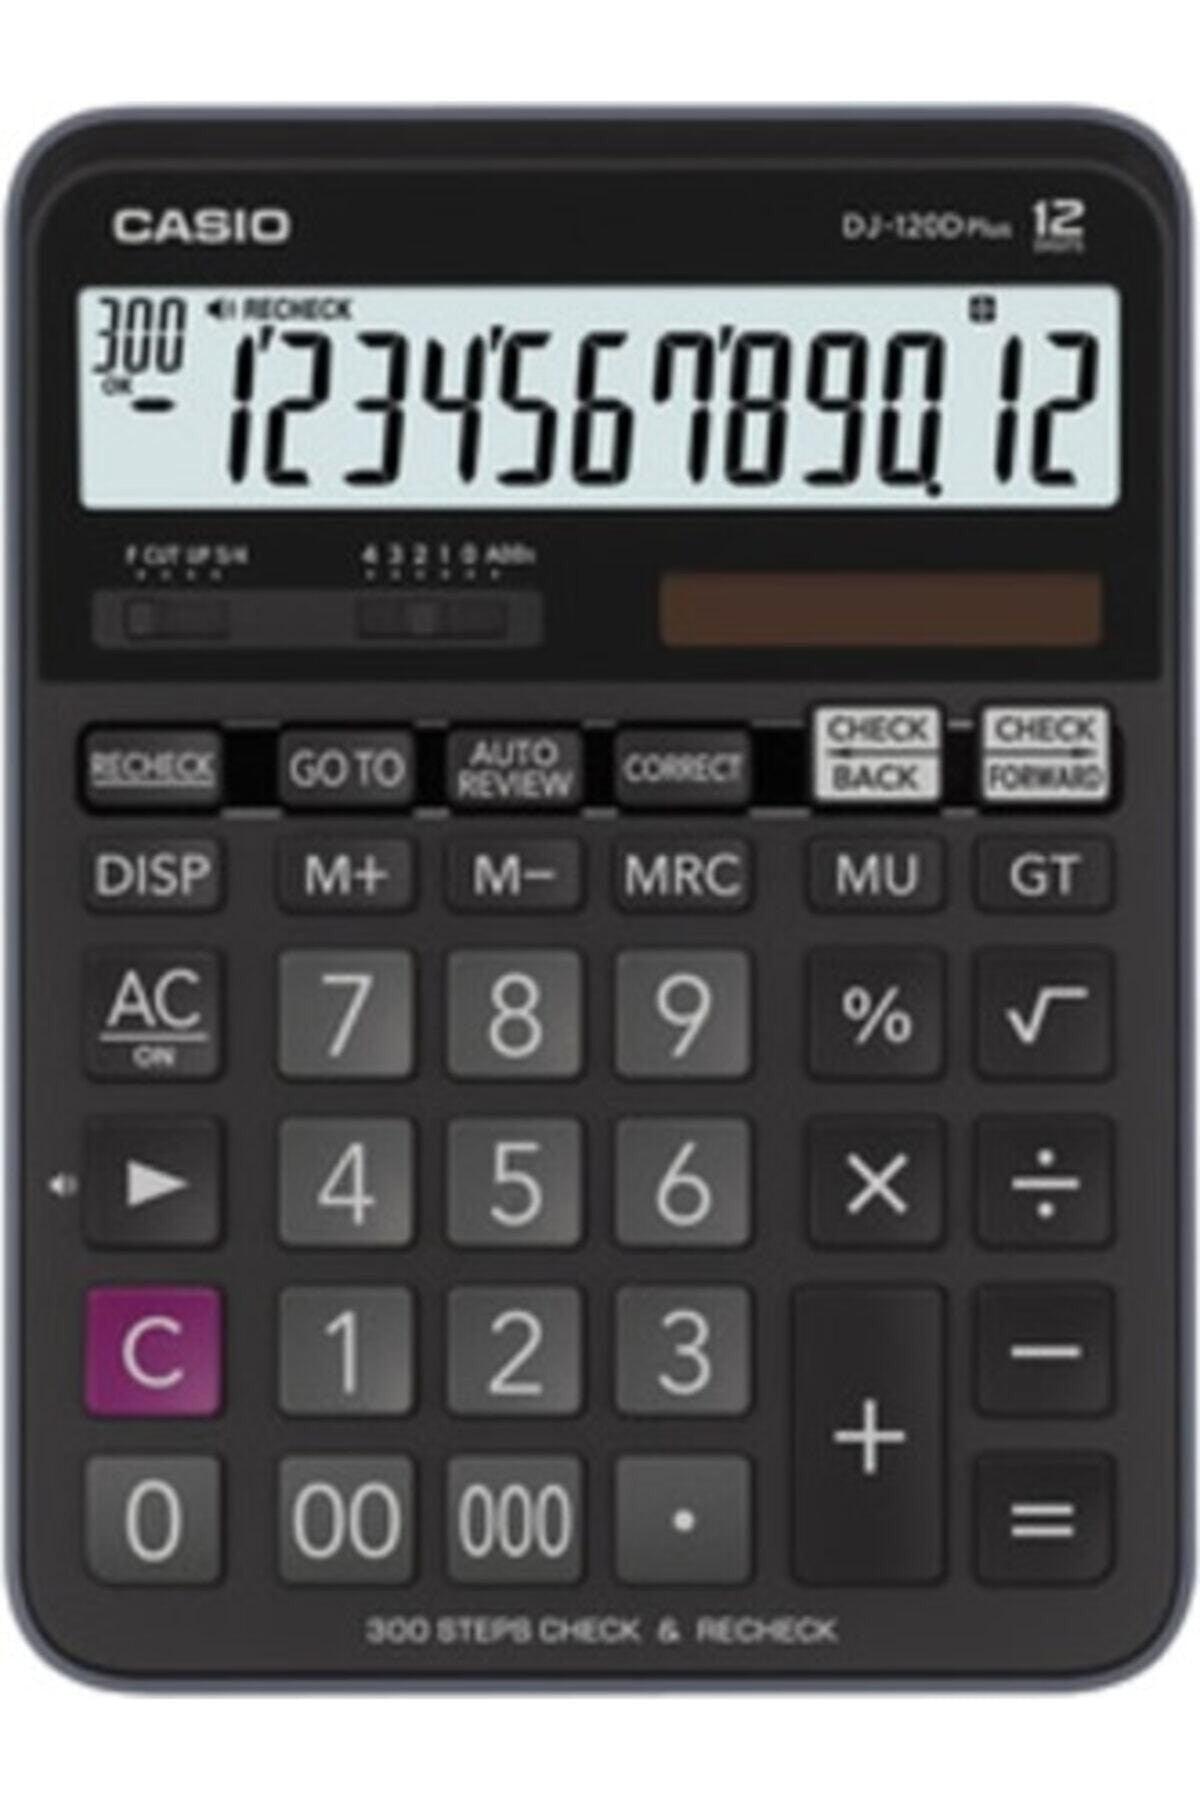 Dj-120d Plus 12 Digits Table with Process Control